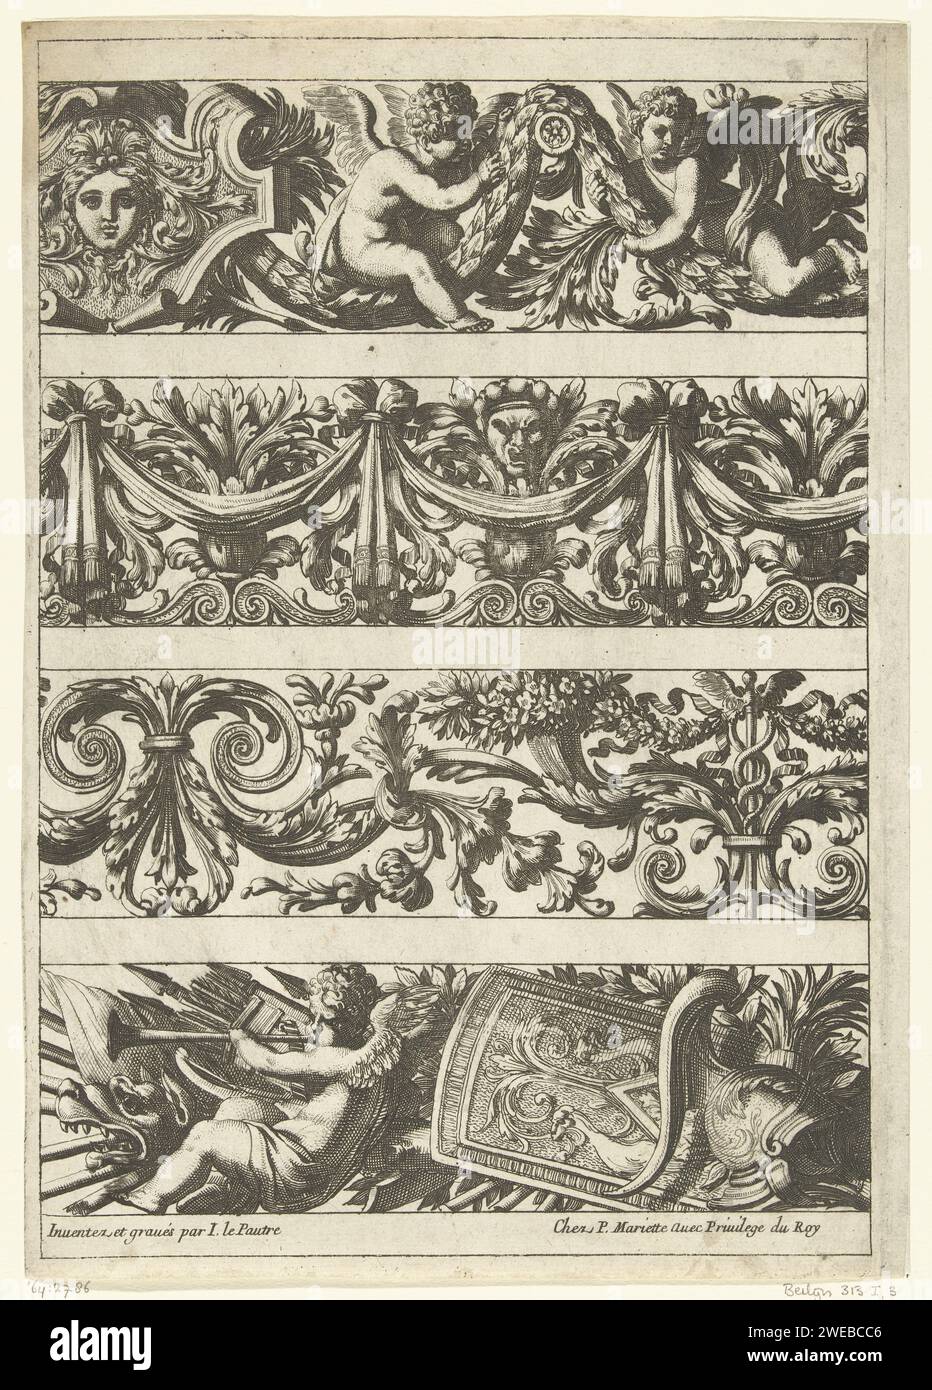 Four rows of Frisians, Jean Lepautre, After c. 1667 - Before 1716 print There is a weapon trophy in the lower Frisian and a putto blows on a trumpet. Leaf 3 from series of 6 blades, each with four rows of Frisians, some of which are divided into two courses. print maker: France (possibly)after own design by: France (possibly)publisher: Paris paper etching Stock Photo